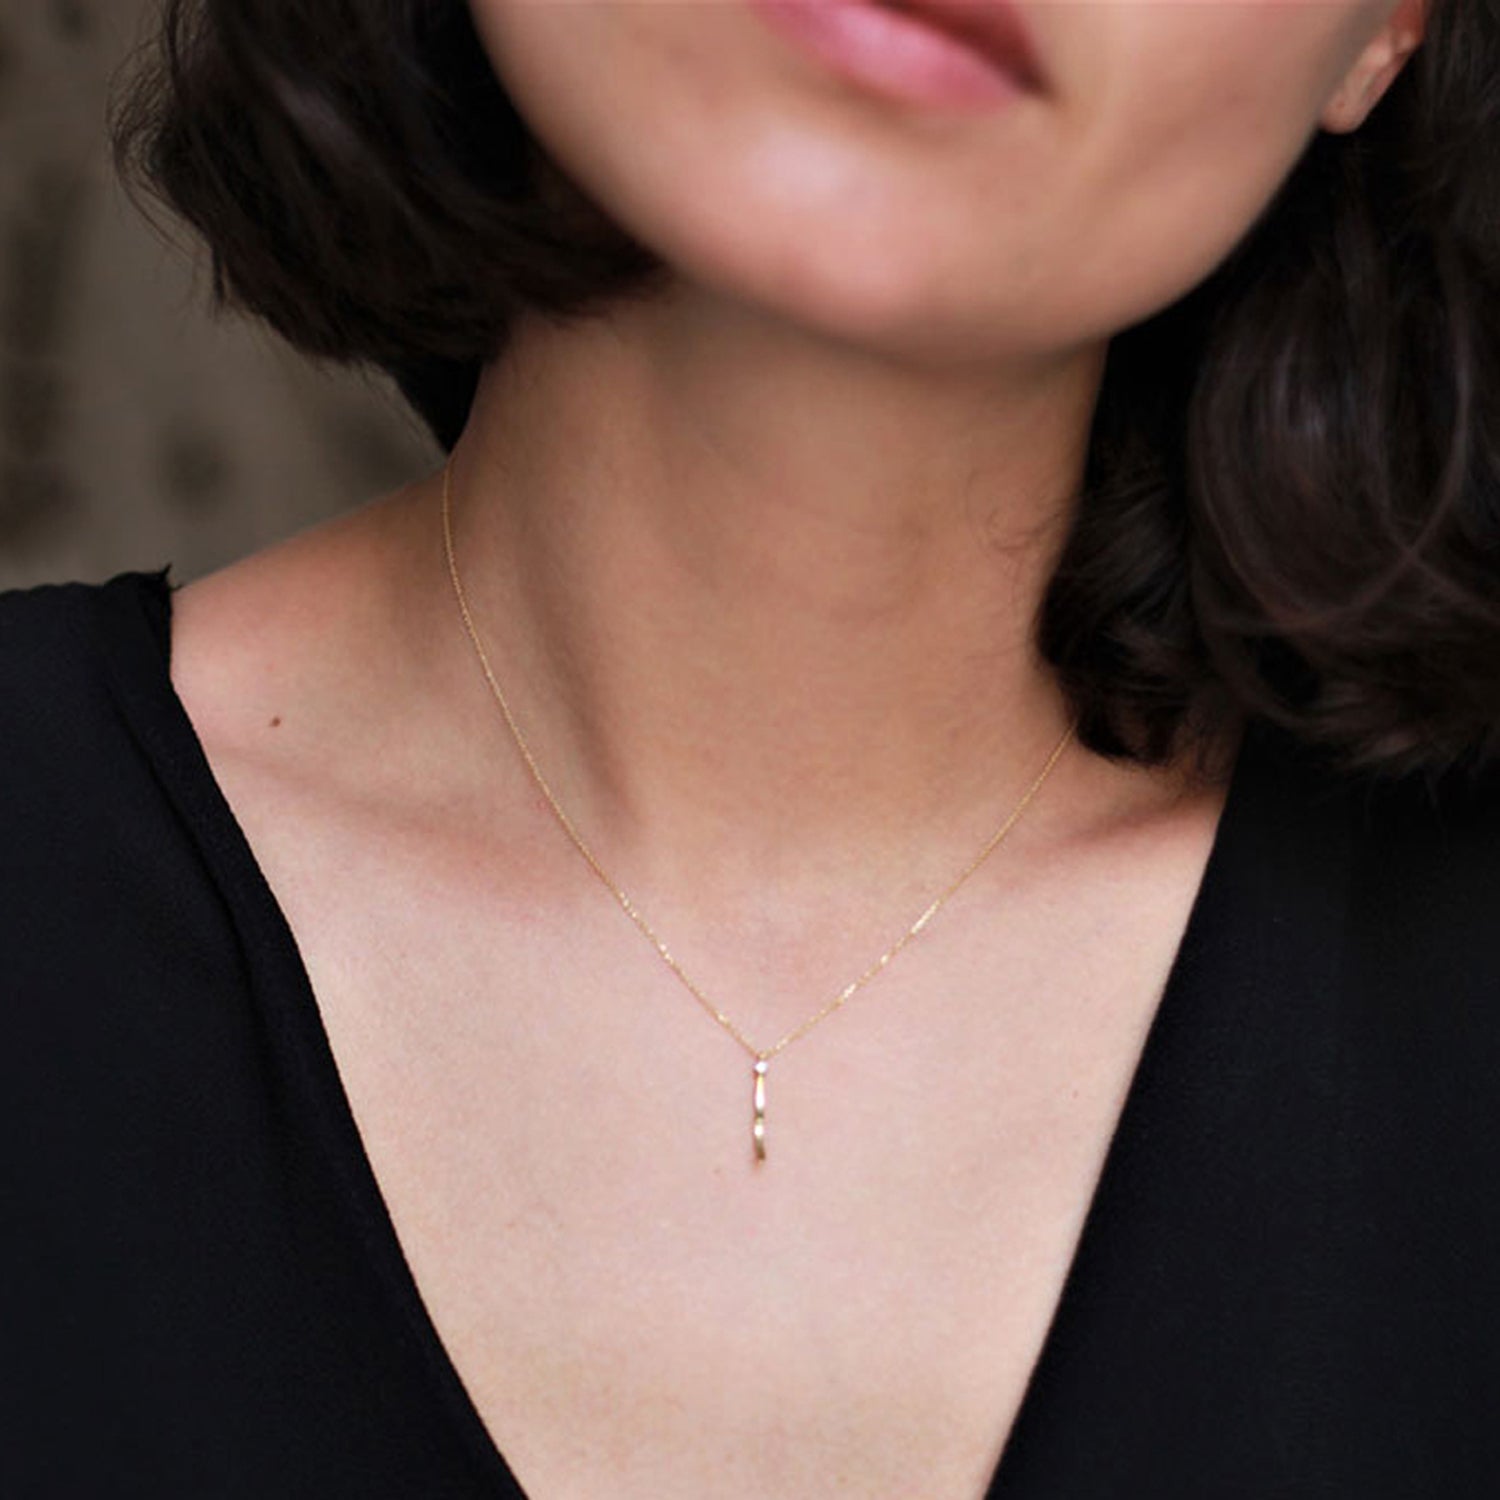 Sycamore Diamond and Bar Necklace on model